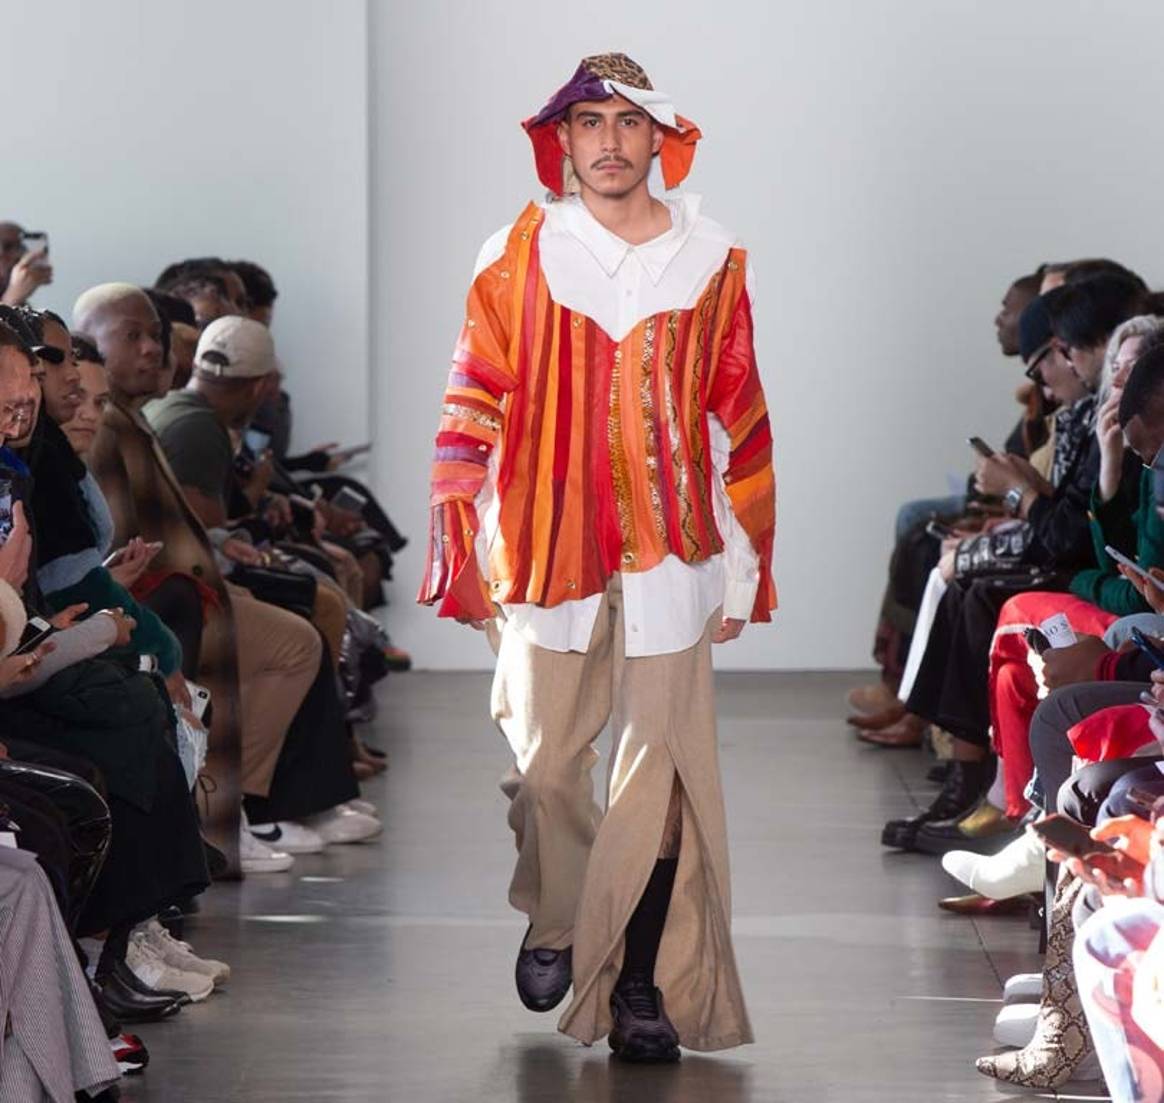 No Sesso reaches east coast consumers with NYFW